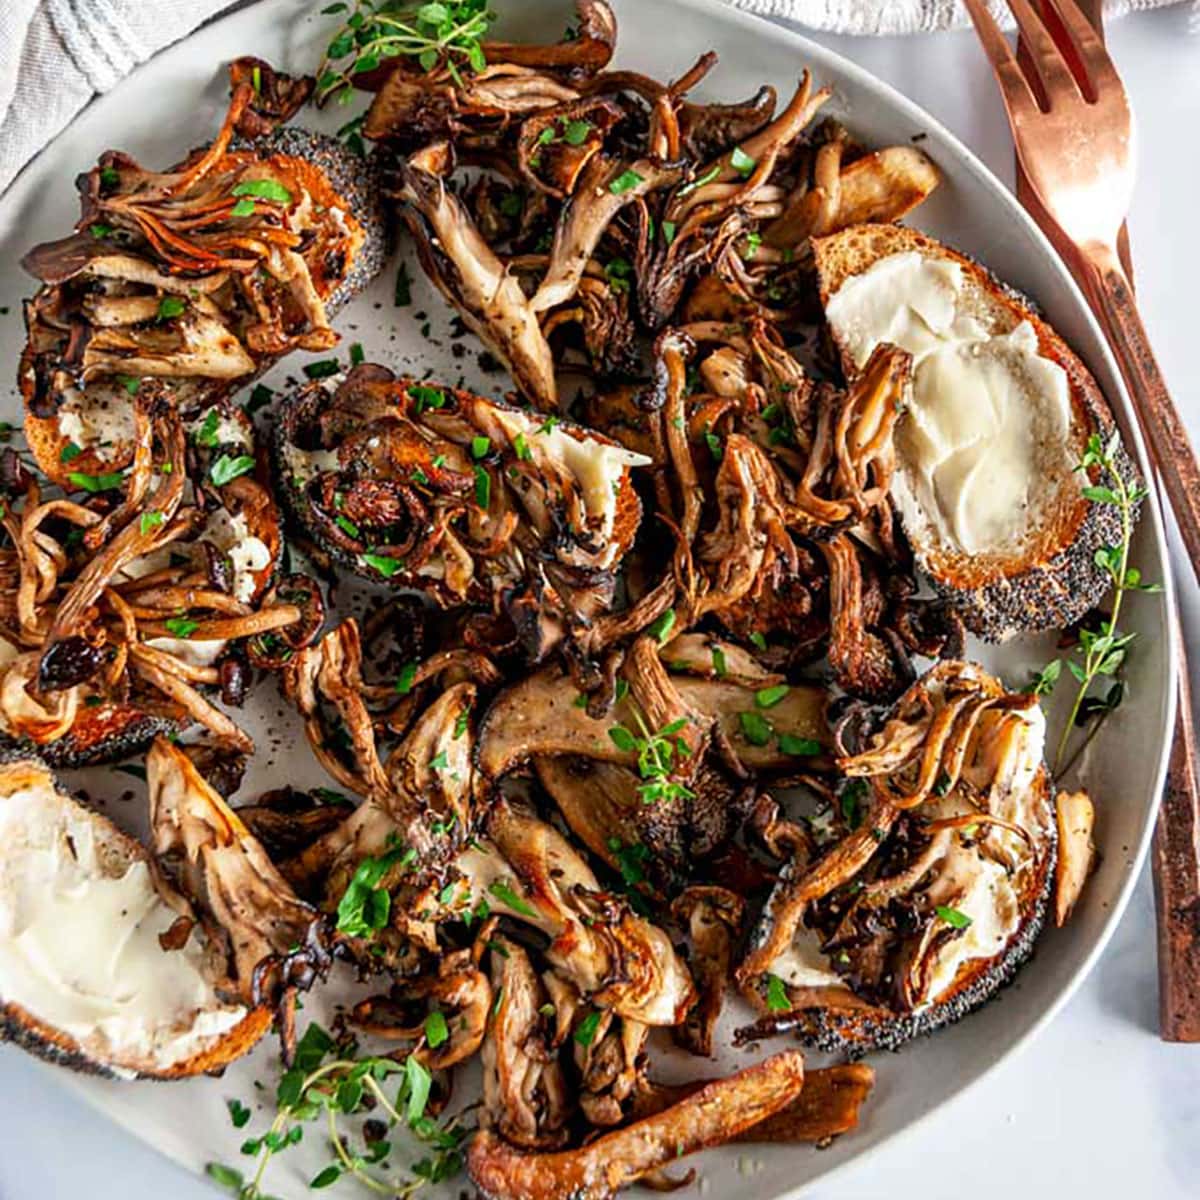 Easy Roasted Herb Mushrooms with buttered baguette slices on gray plate with copper dinner ware